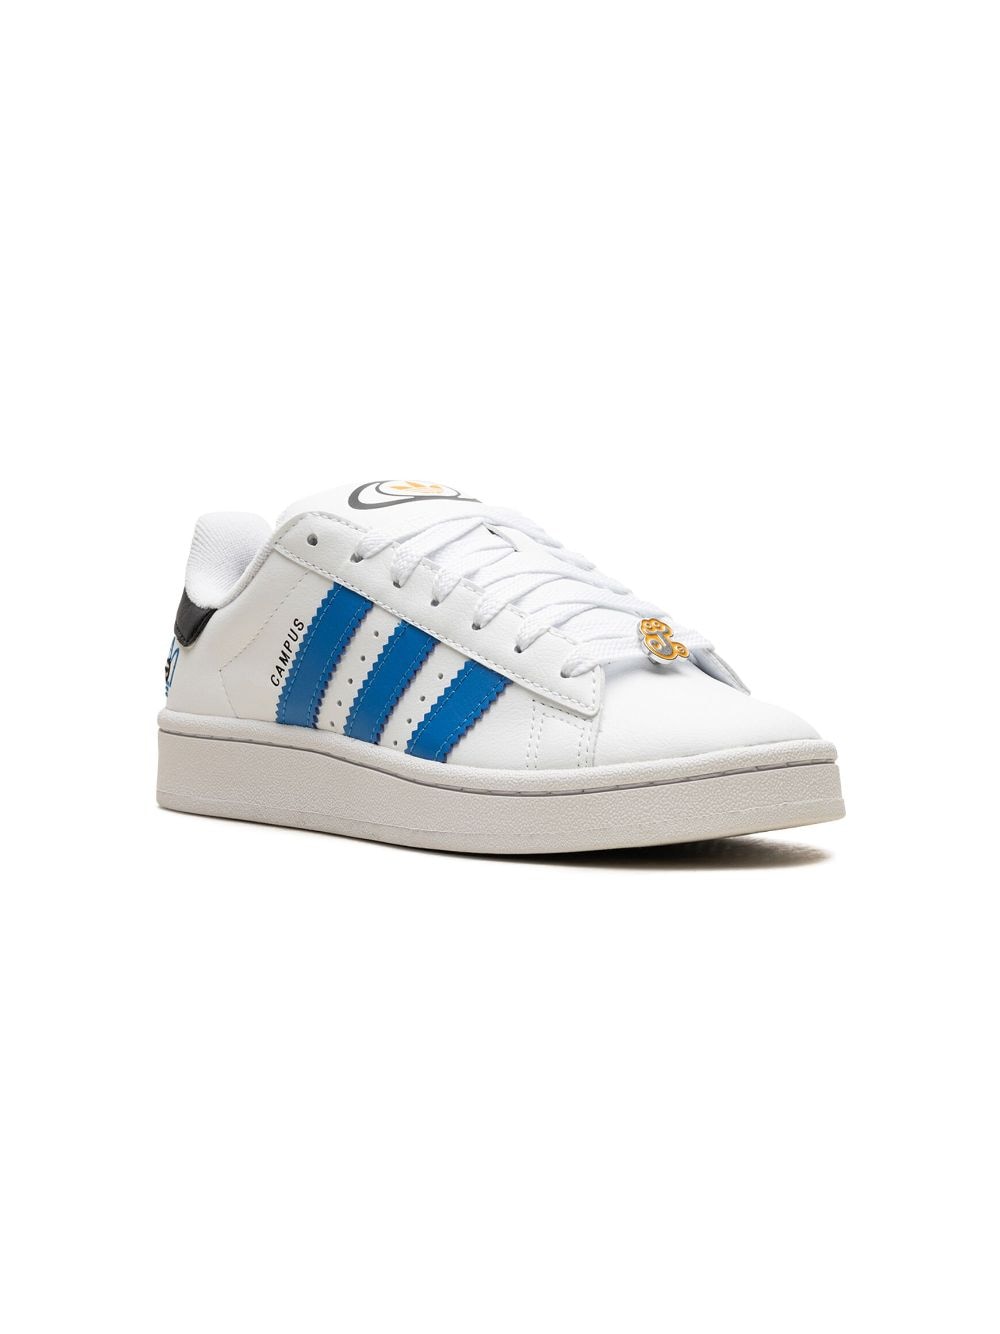 adidas Kids x James Jarvis Campus 00s J "Abstract Trefoil" sneakers - White von adidas Kids